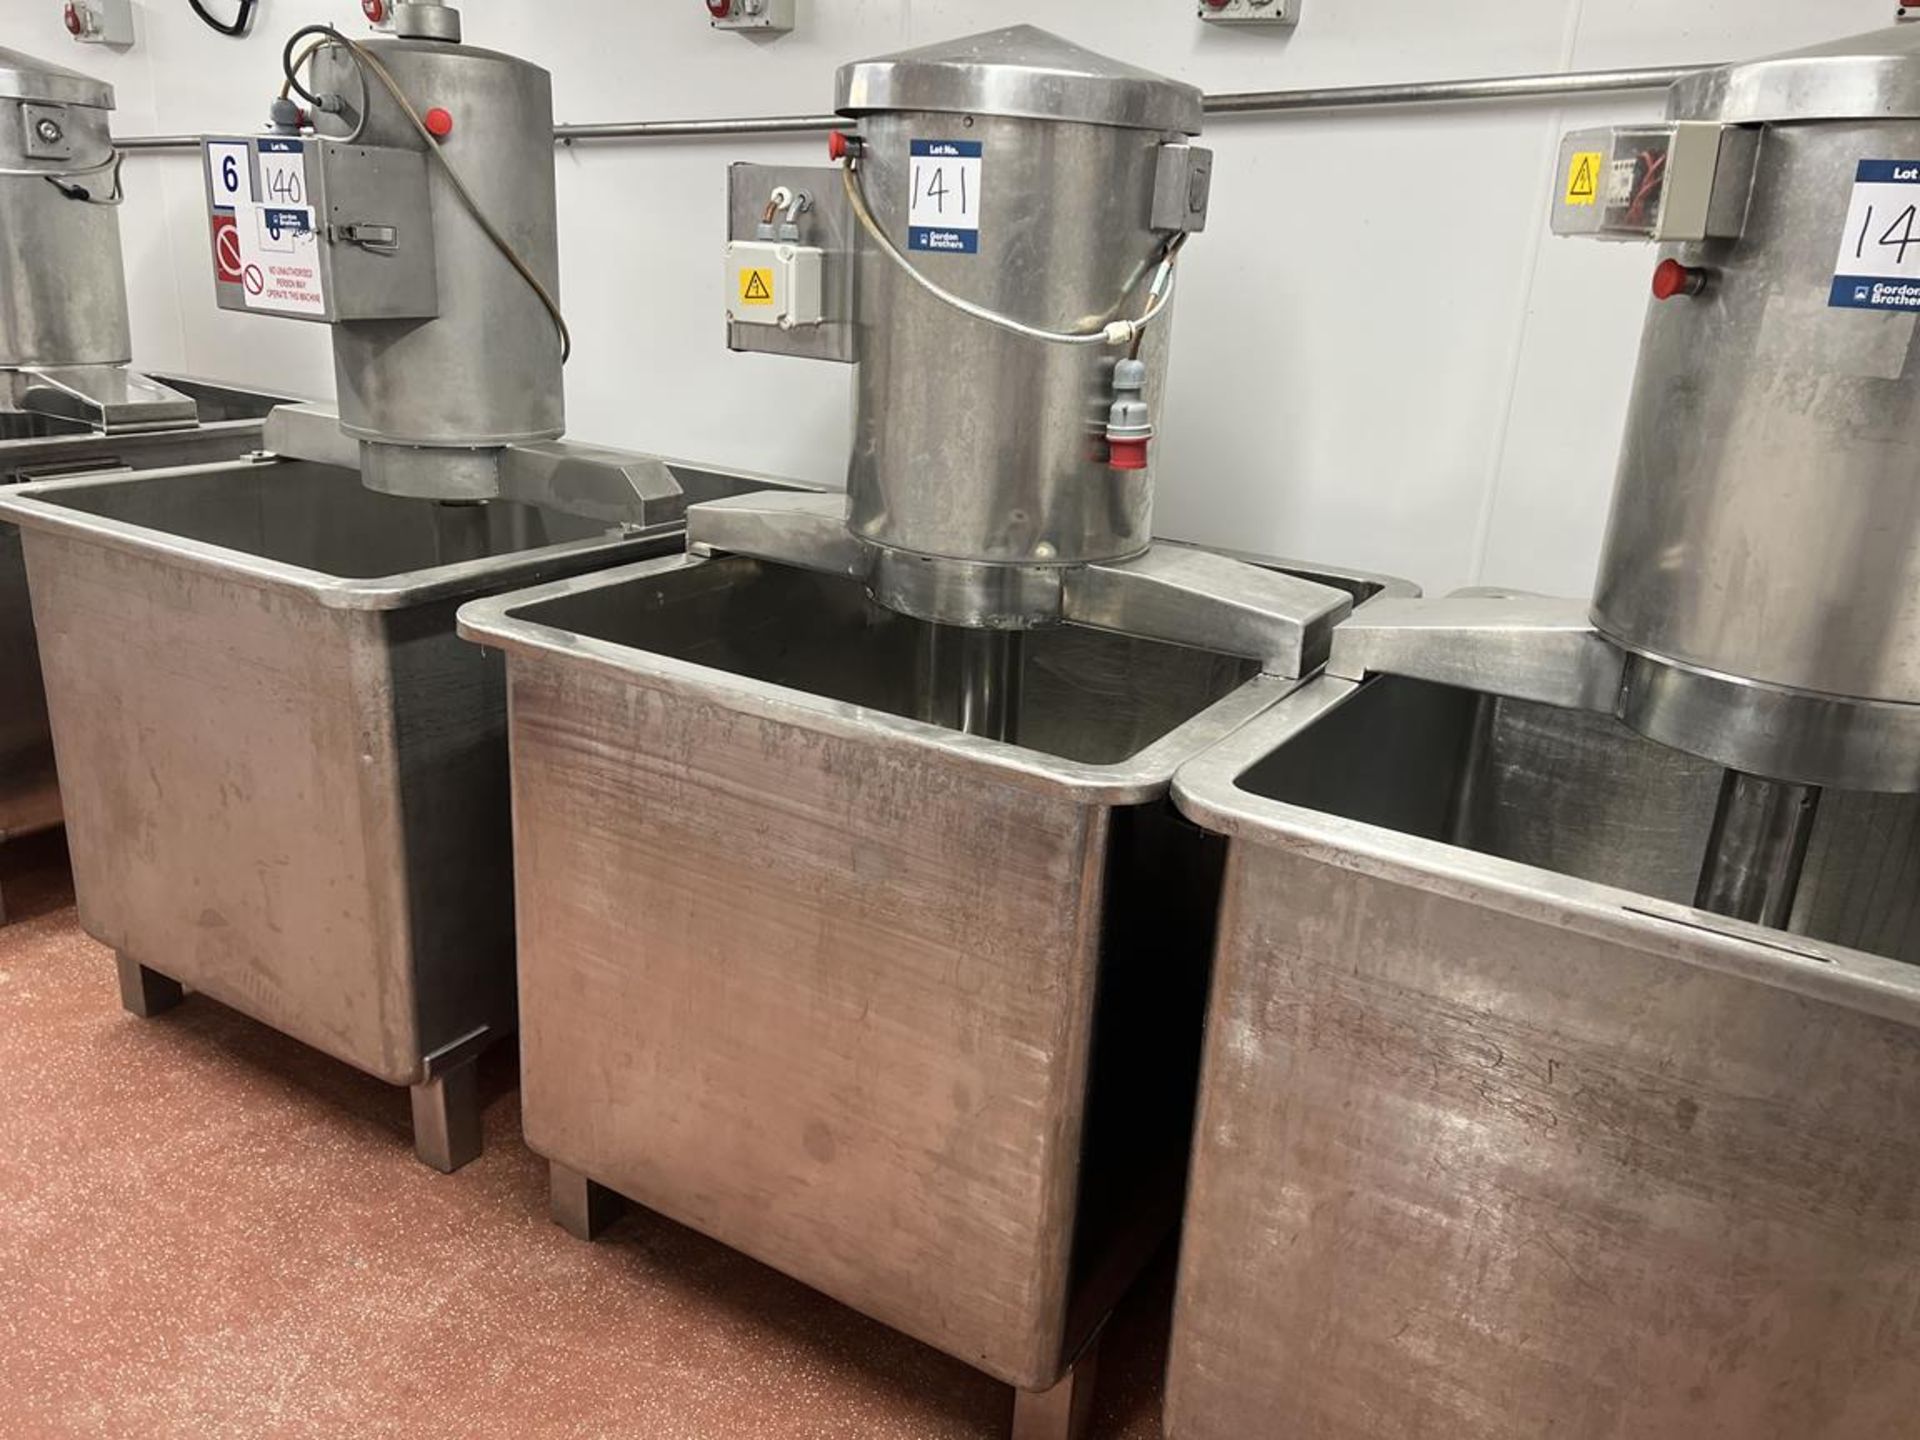 All stainless steel 236kg stainless steel paddle mixers, 415v, base size 910mm x 1110 x 840mm